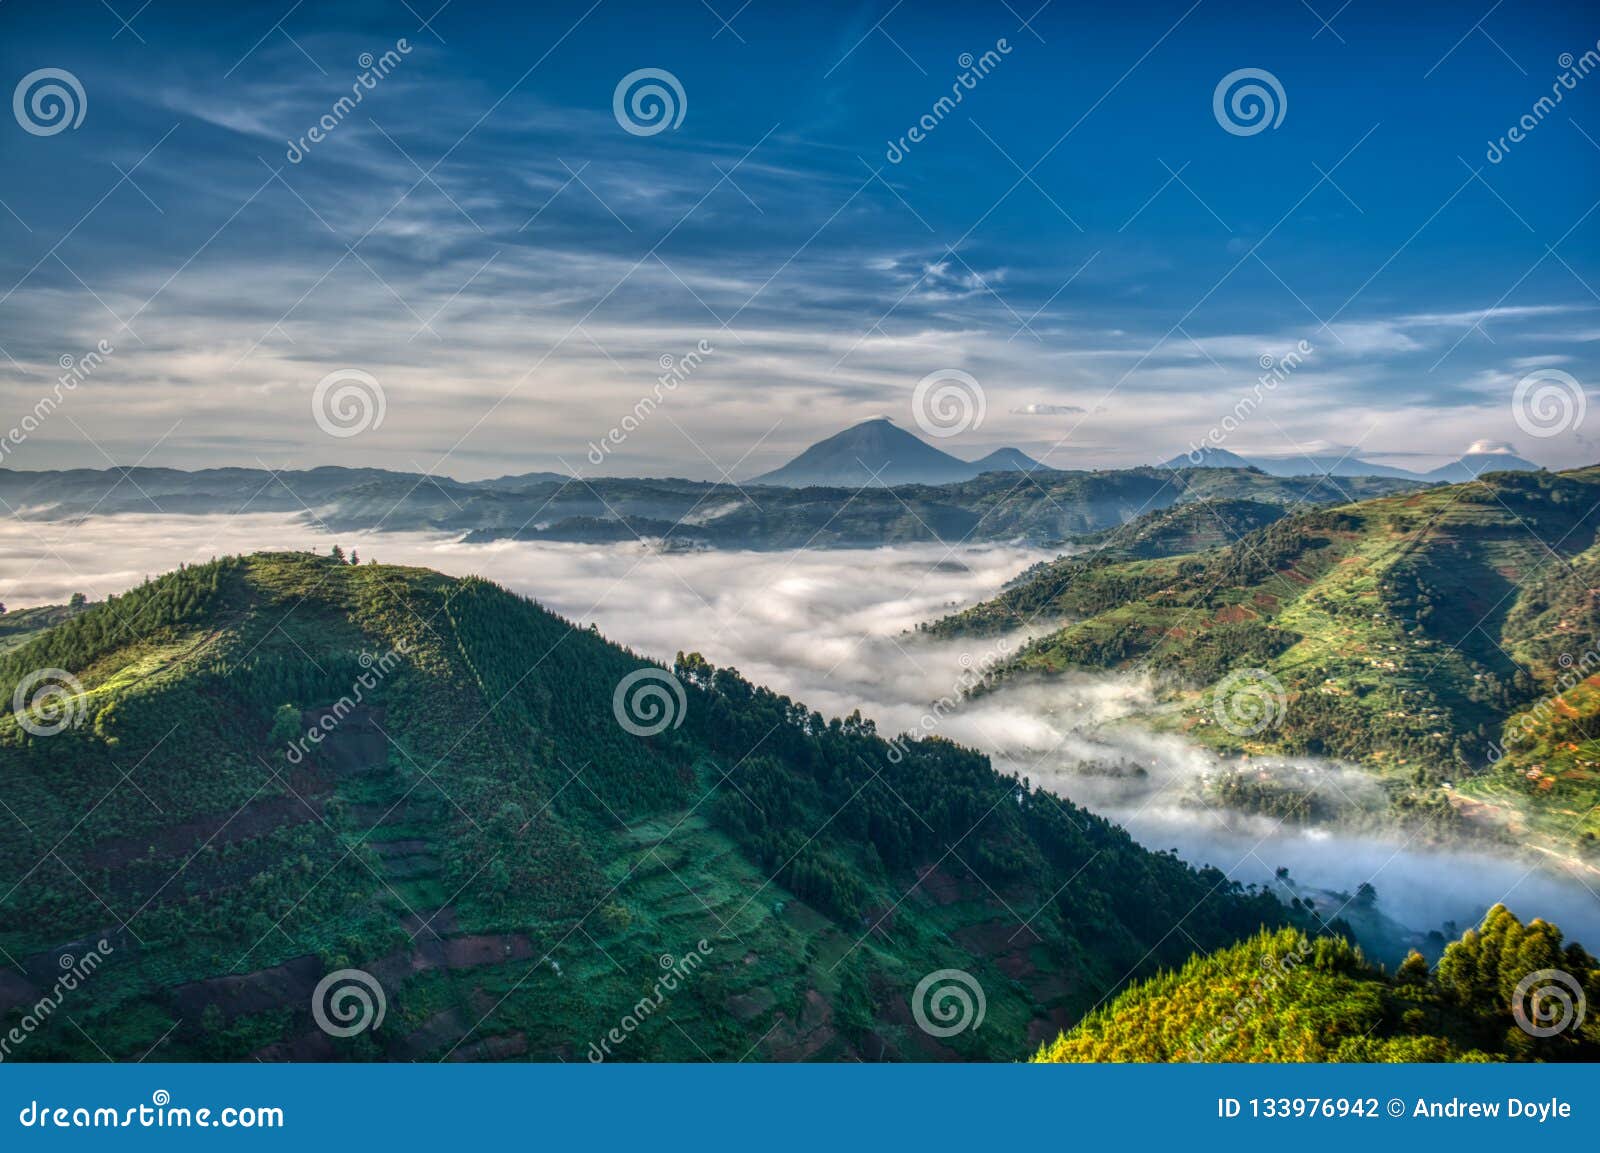 morning in uganda with volcanoes in background, fog in the valley and farmlands stretching far